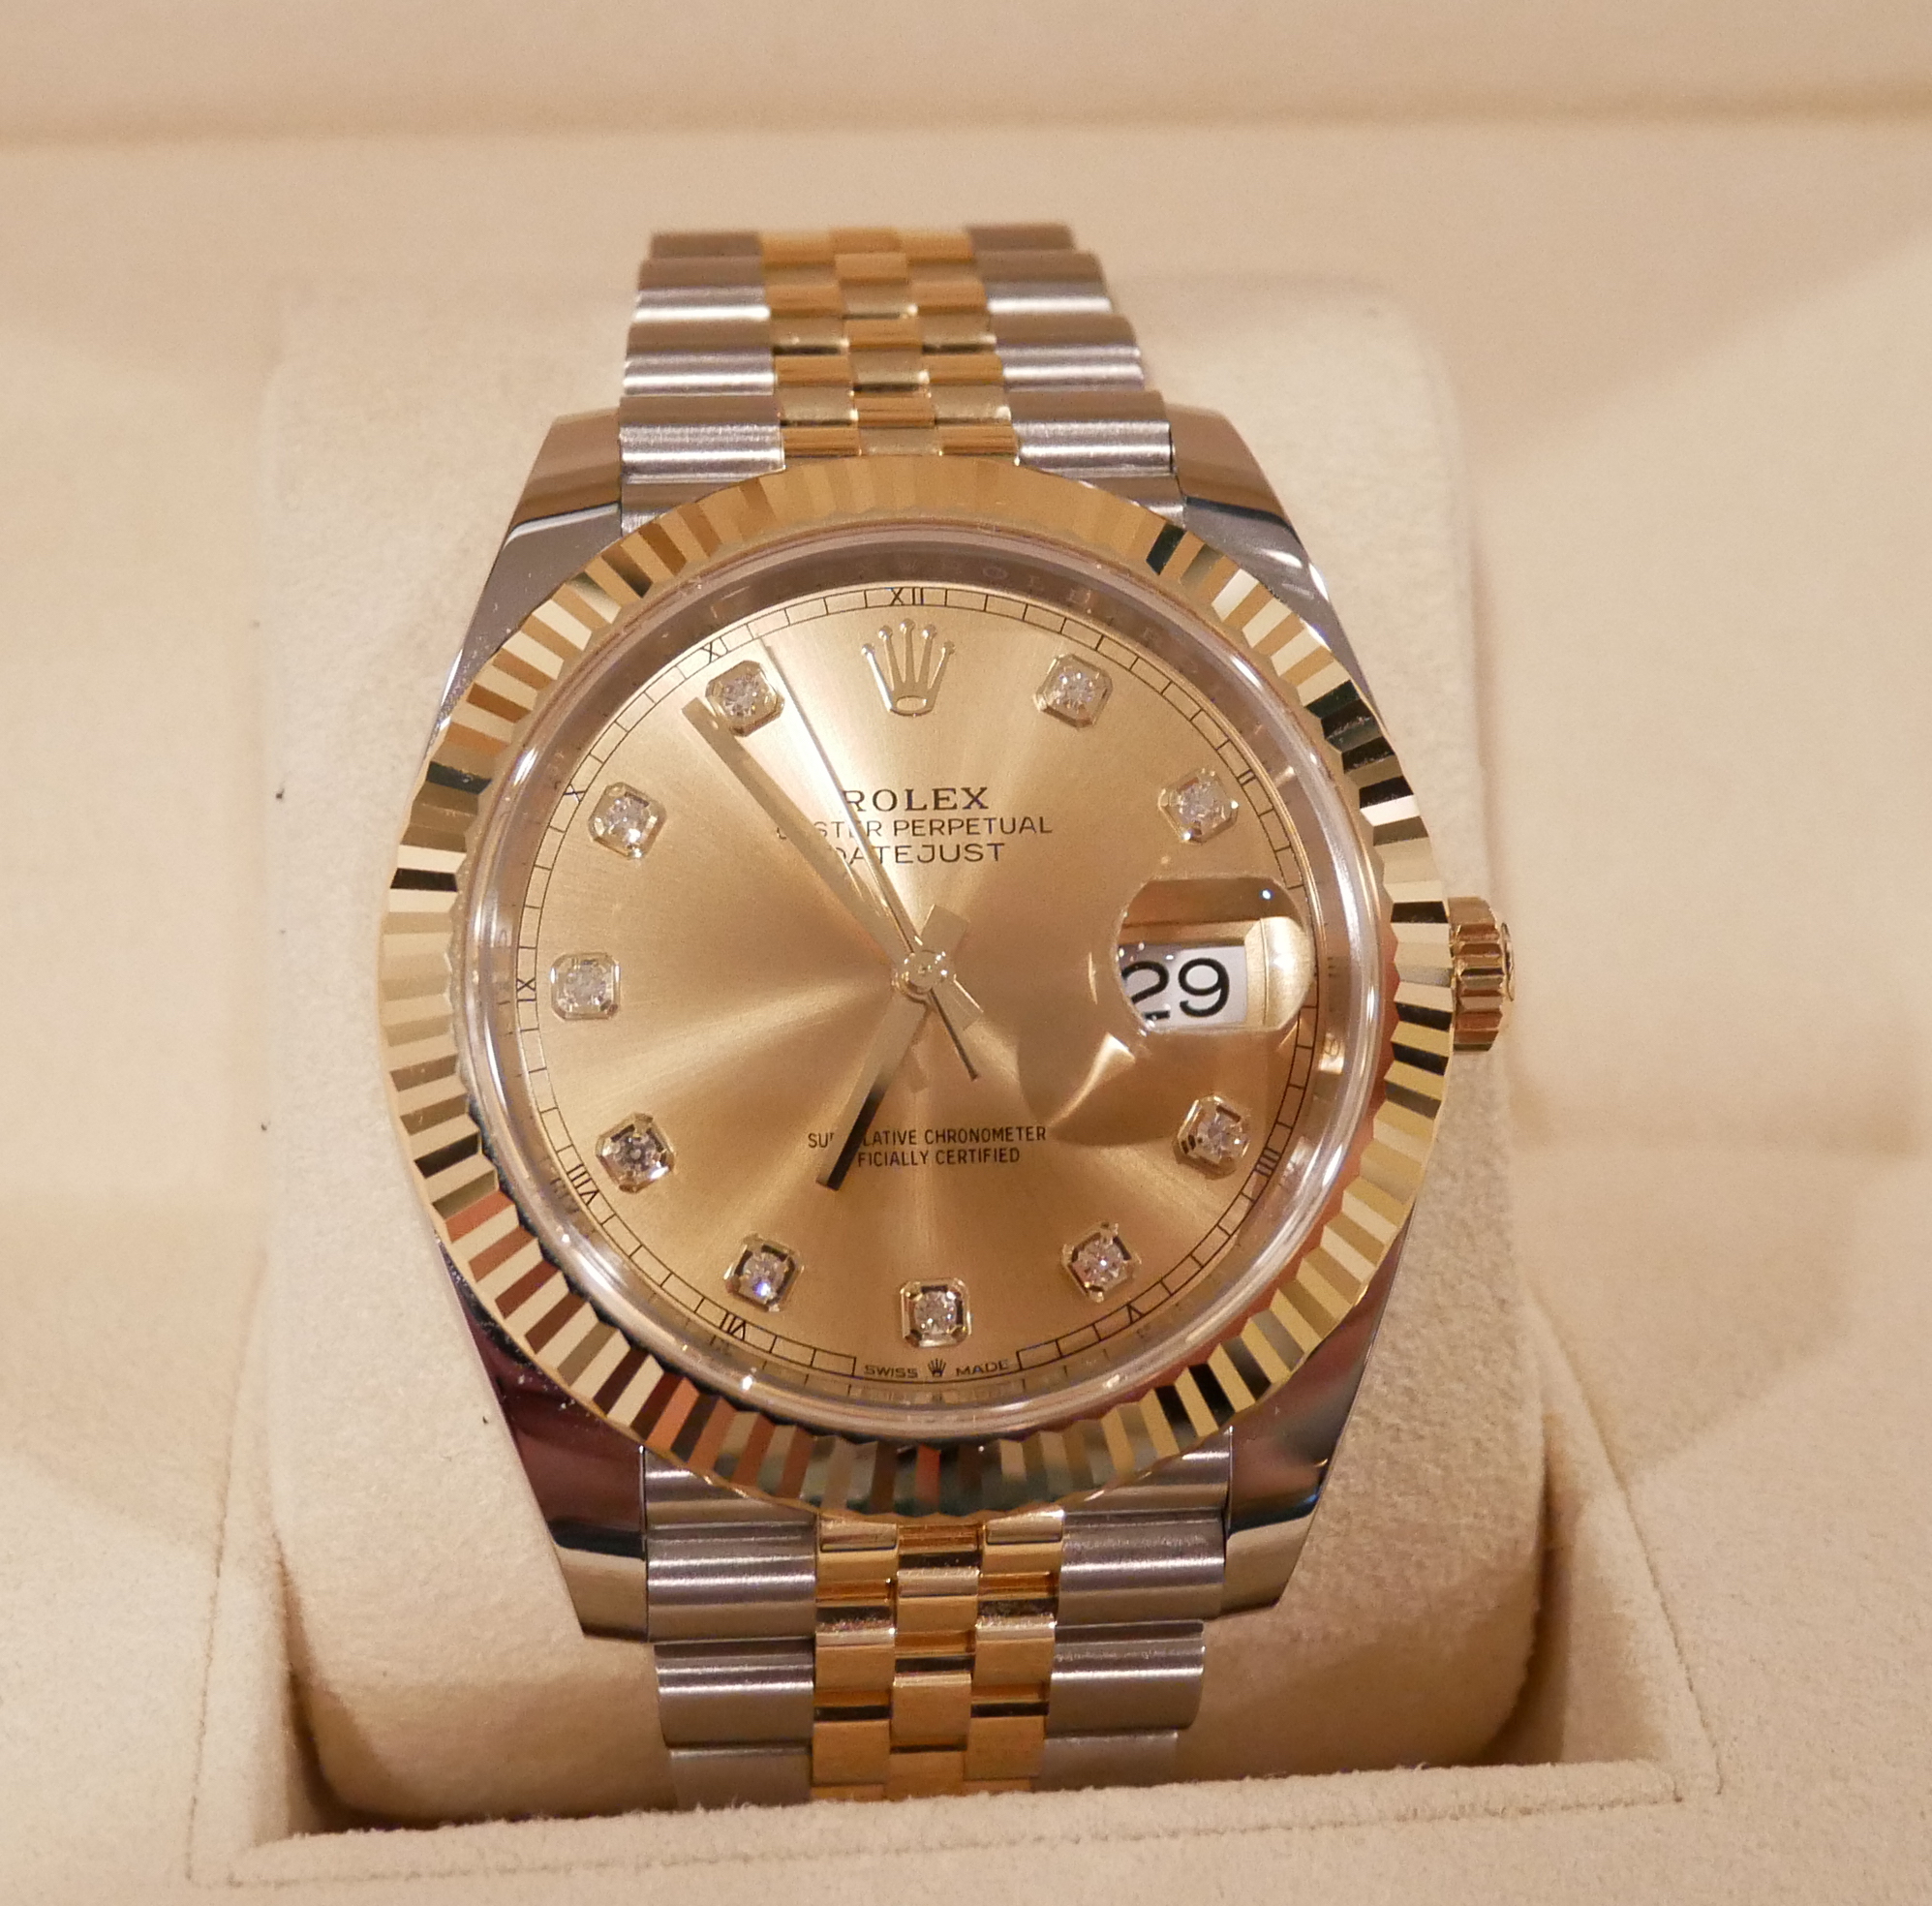 datejust 41 champagne dial